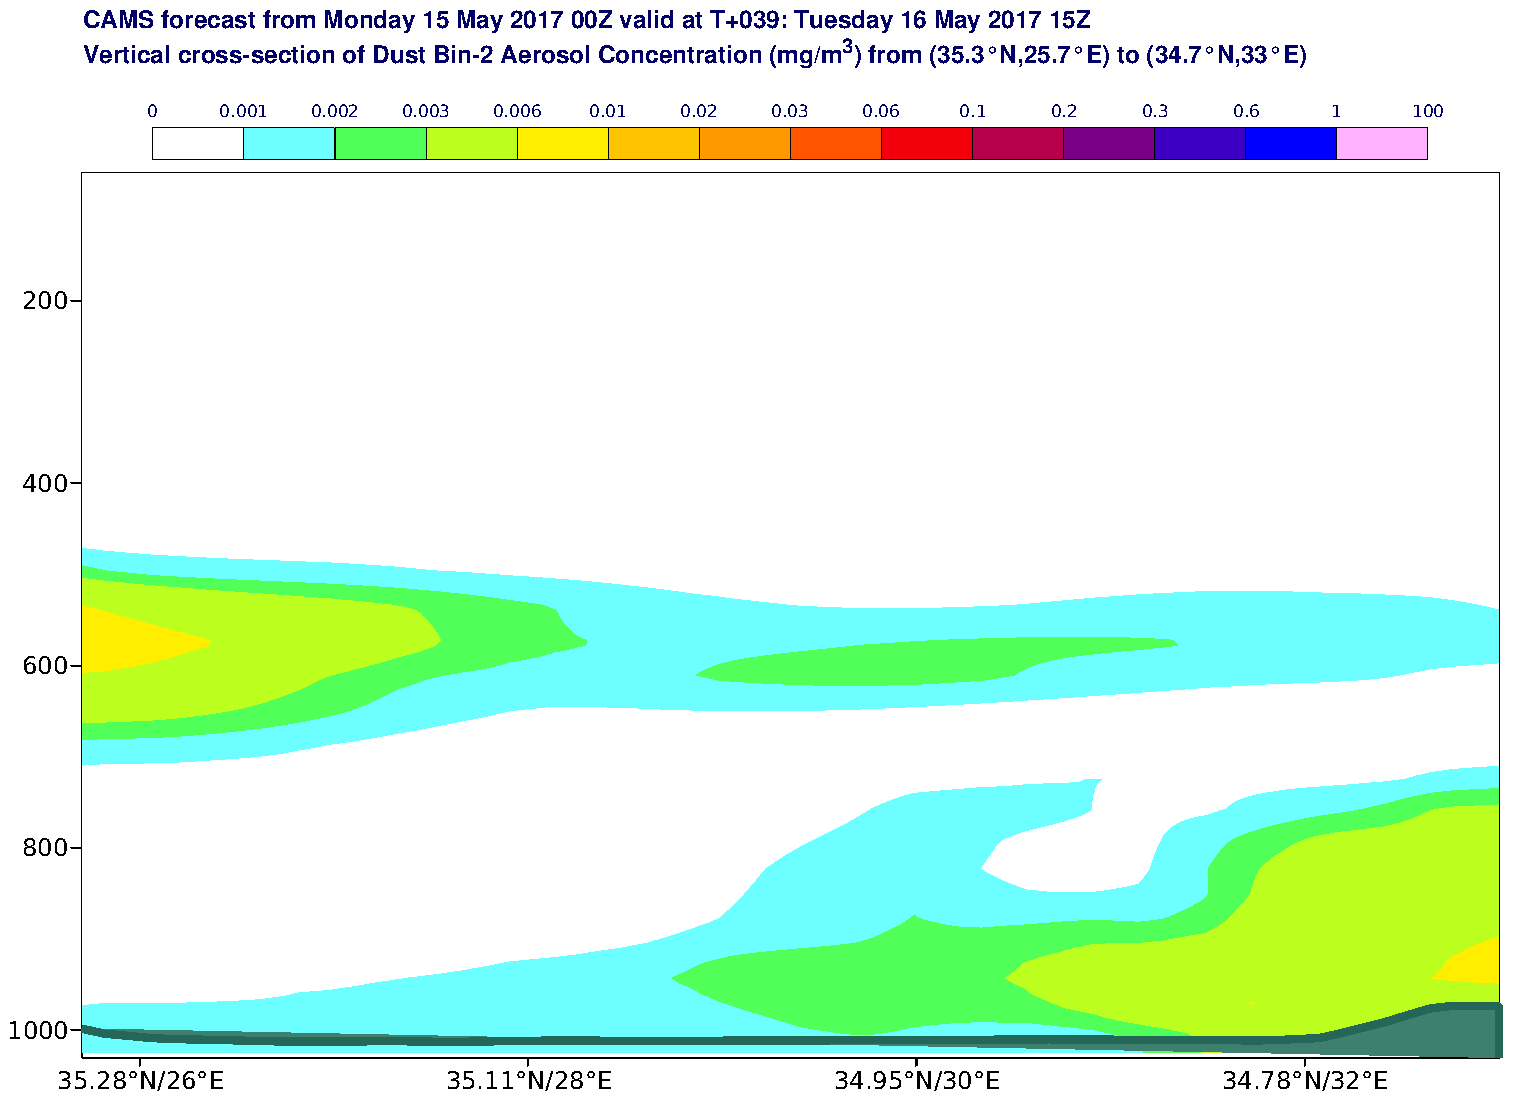 Vertical cross-section of Dust Bin-2 Aerosol Concentration (mg/m3) valid at T39 - 2017-05-16 15:00